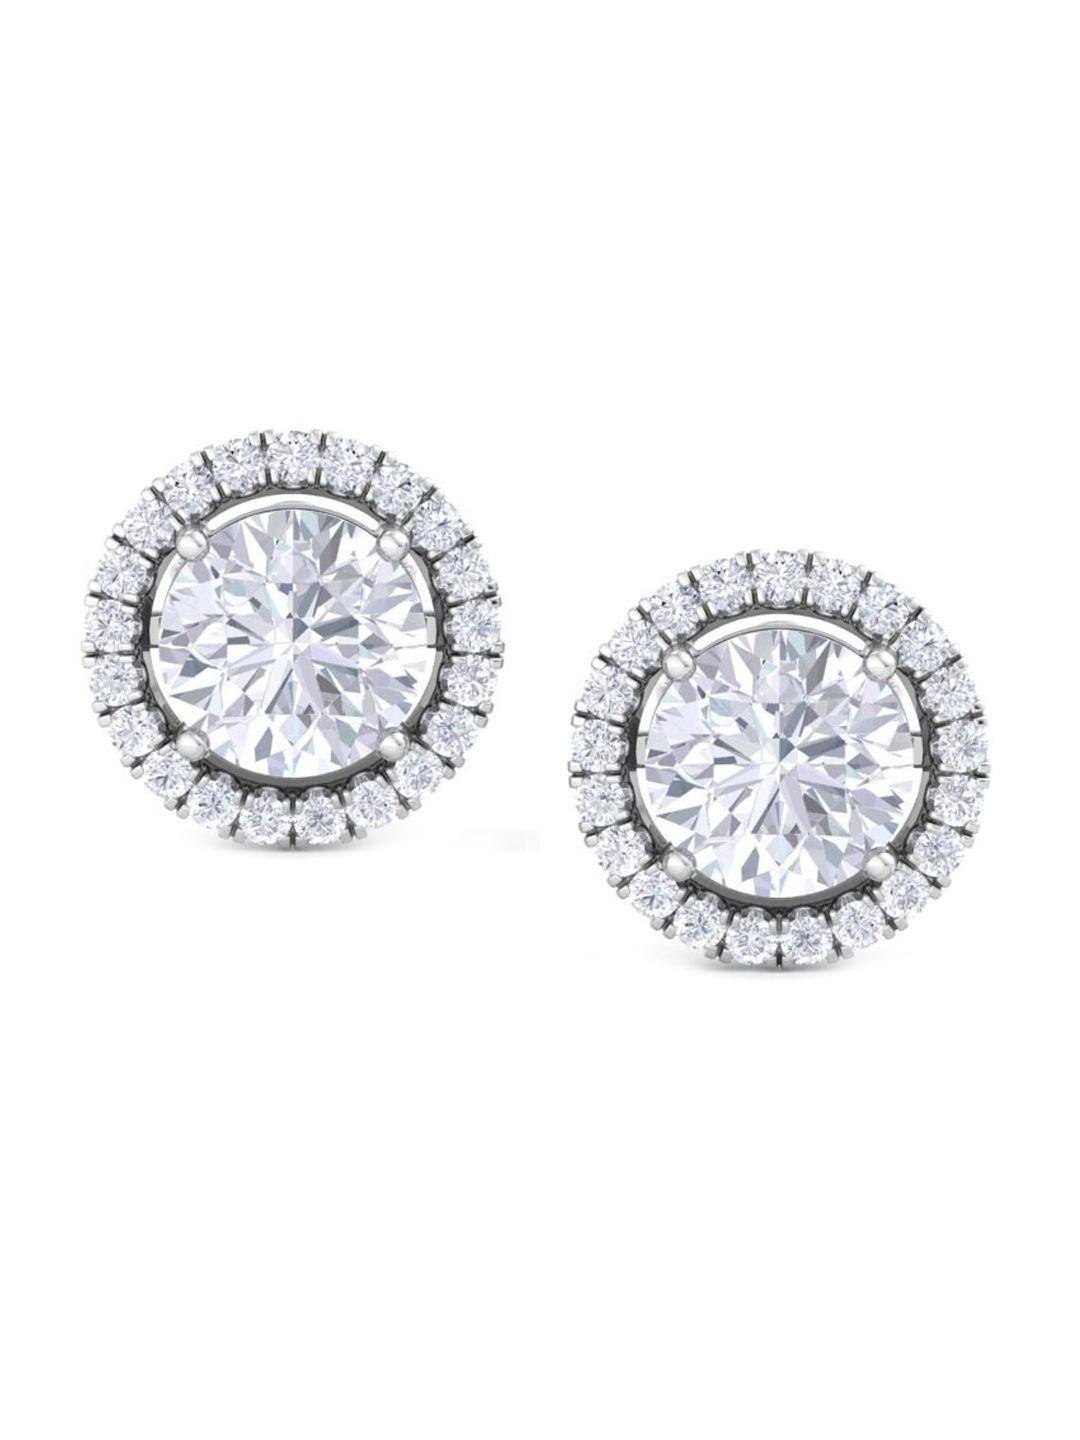 inddus jewels 925 sterling silver rhodium-plated circular studs earrings